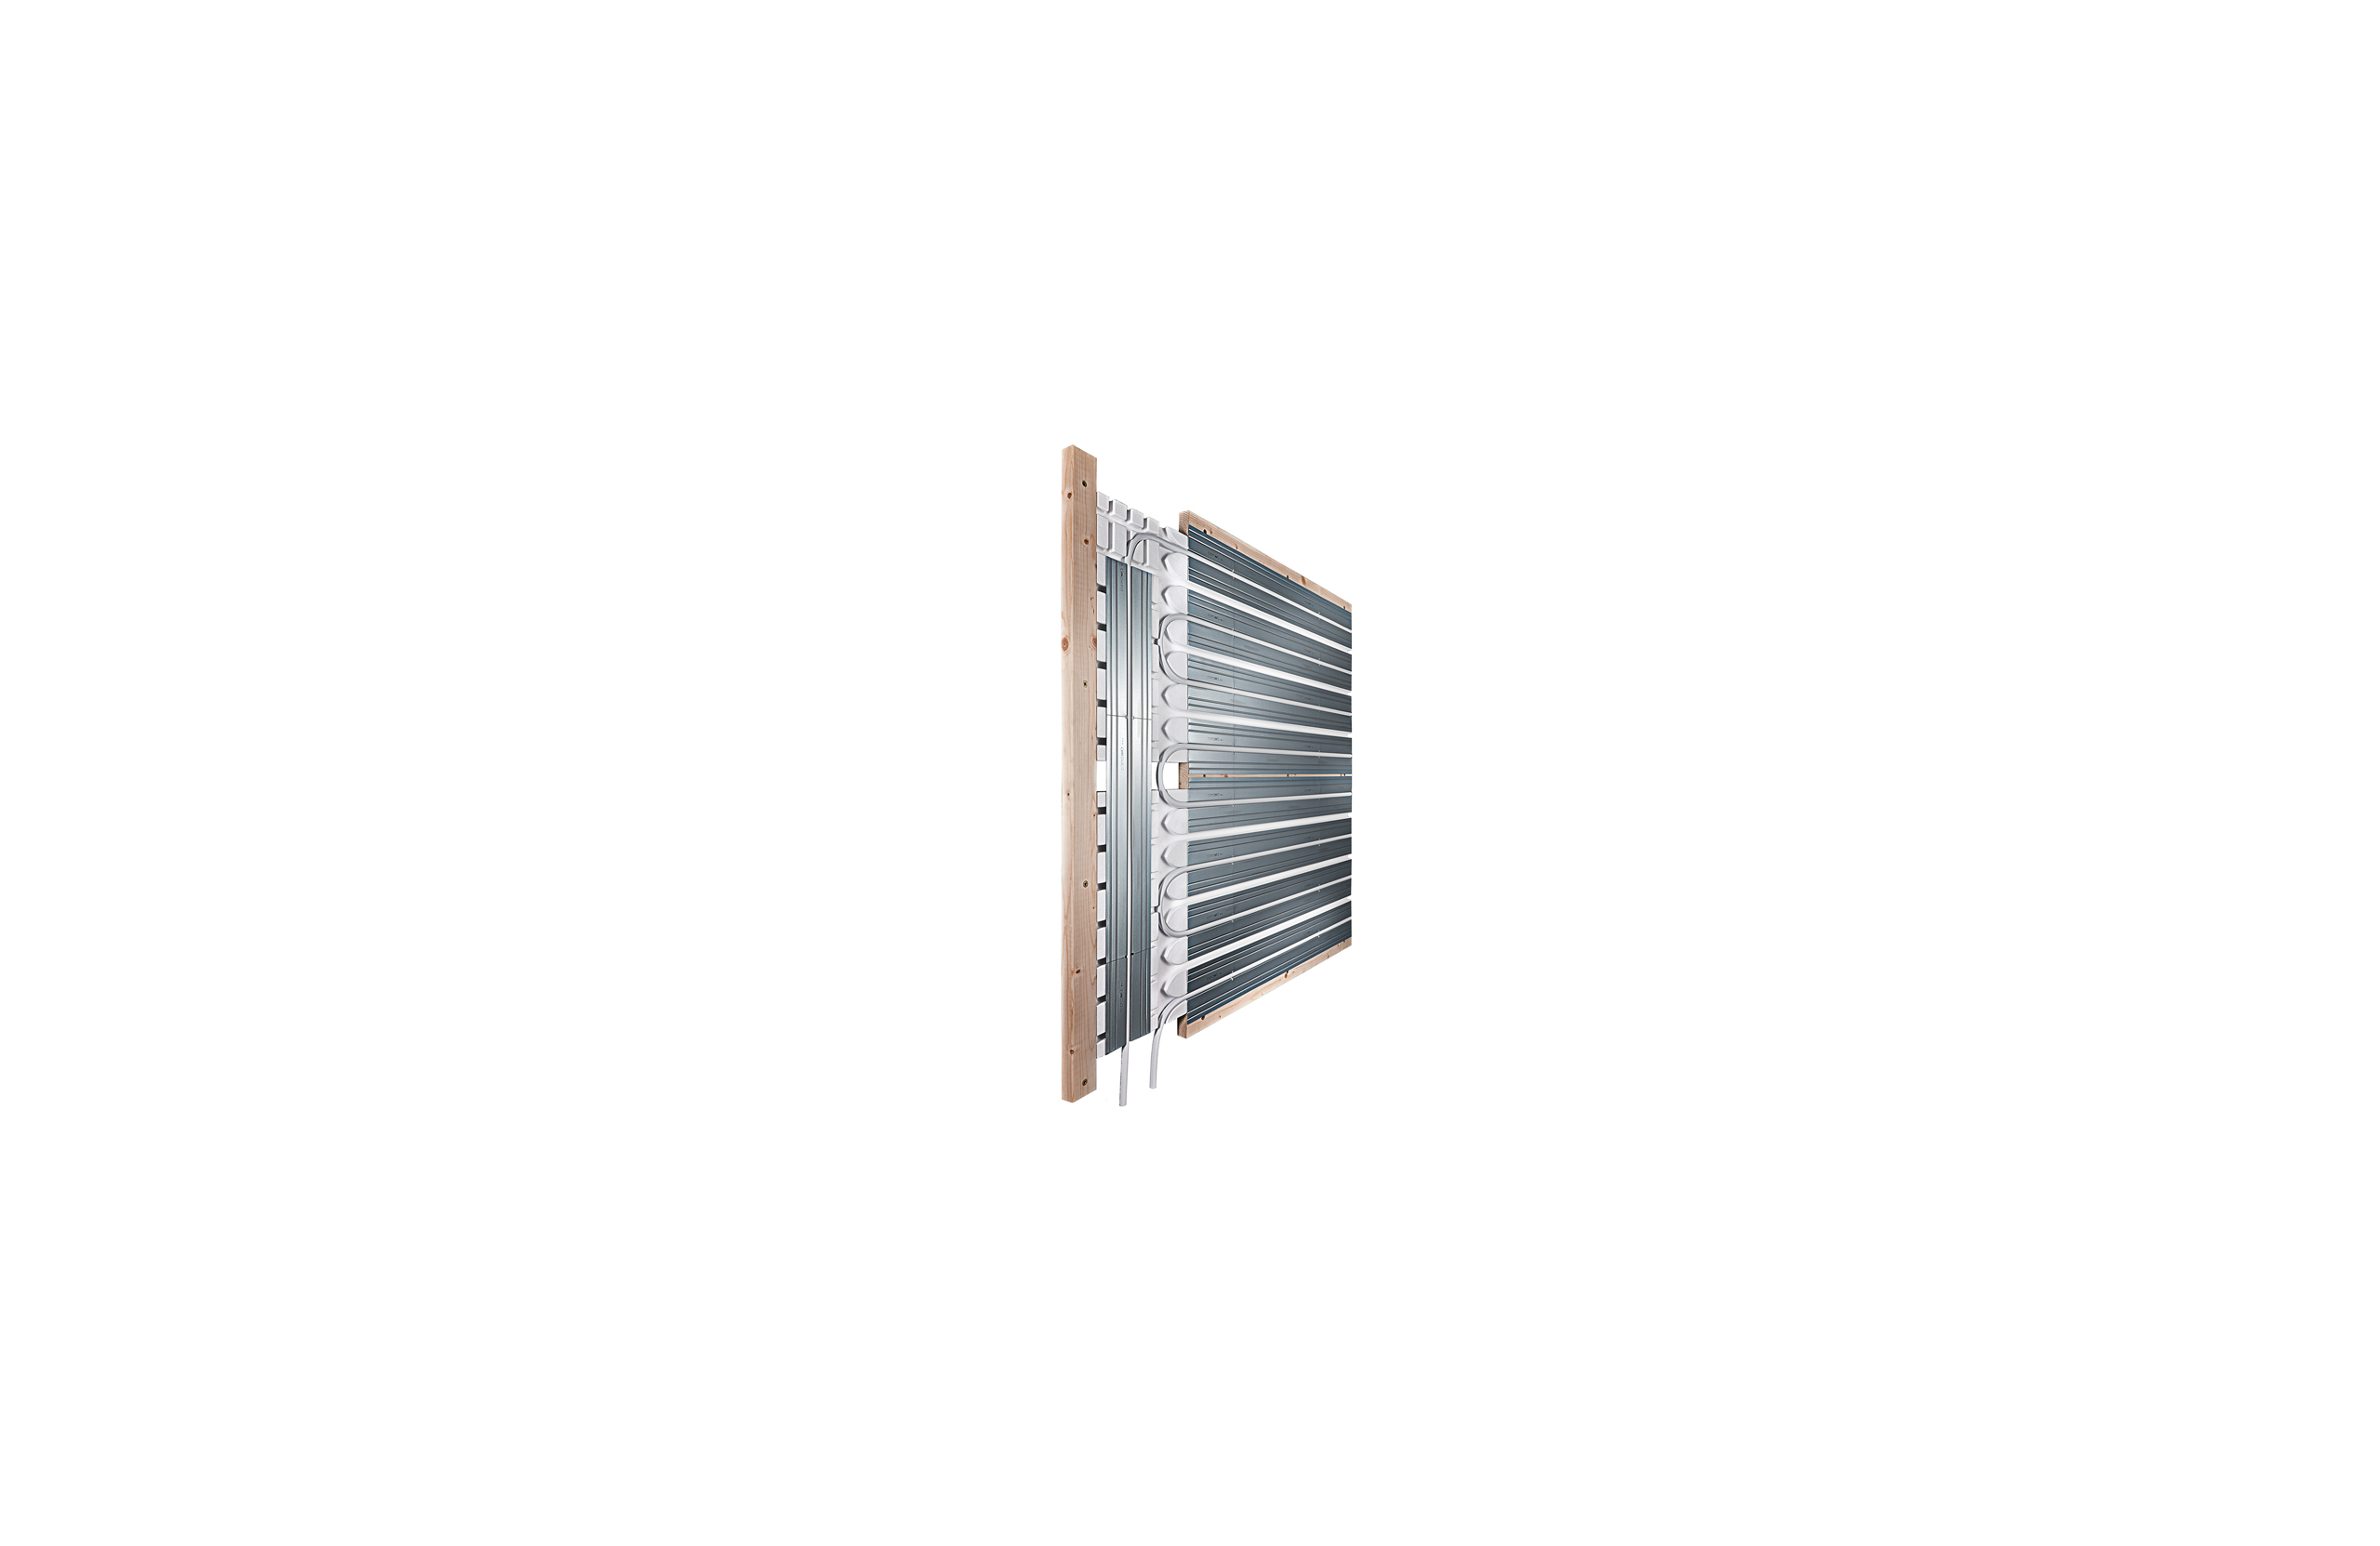 x-net C22 dry system wall heating – the perfect wall heating for dry construction.